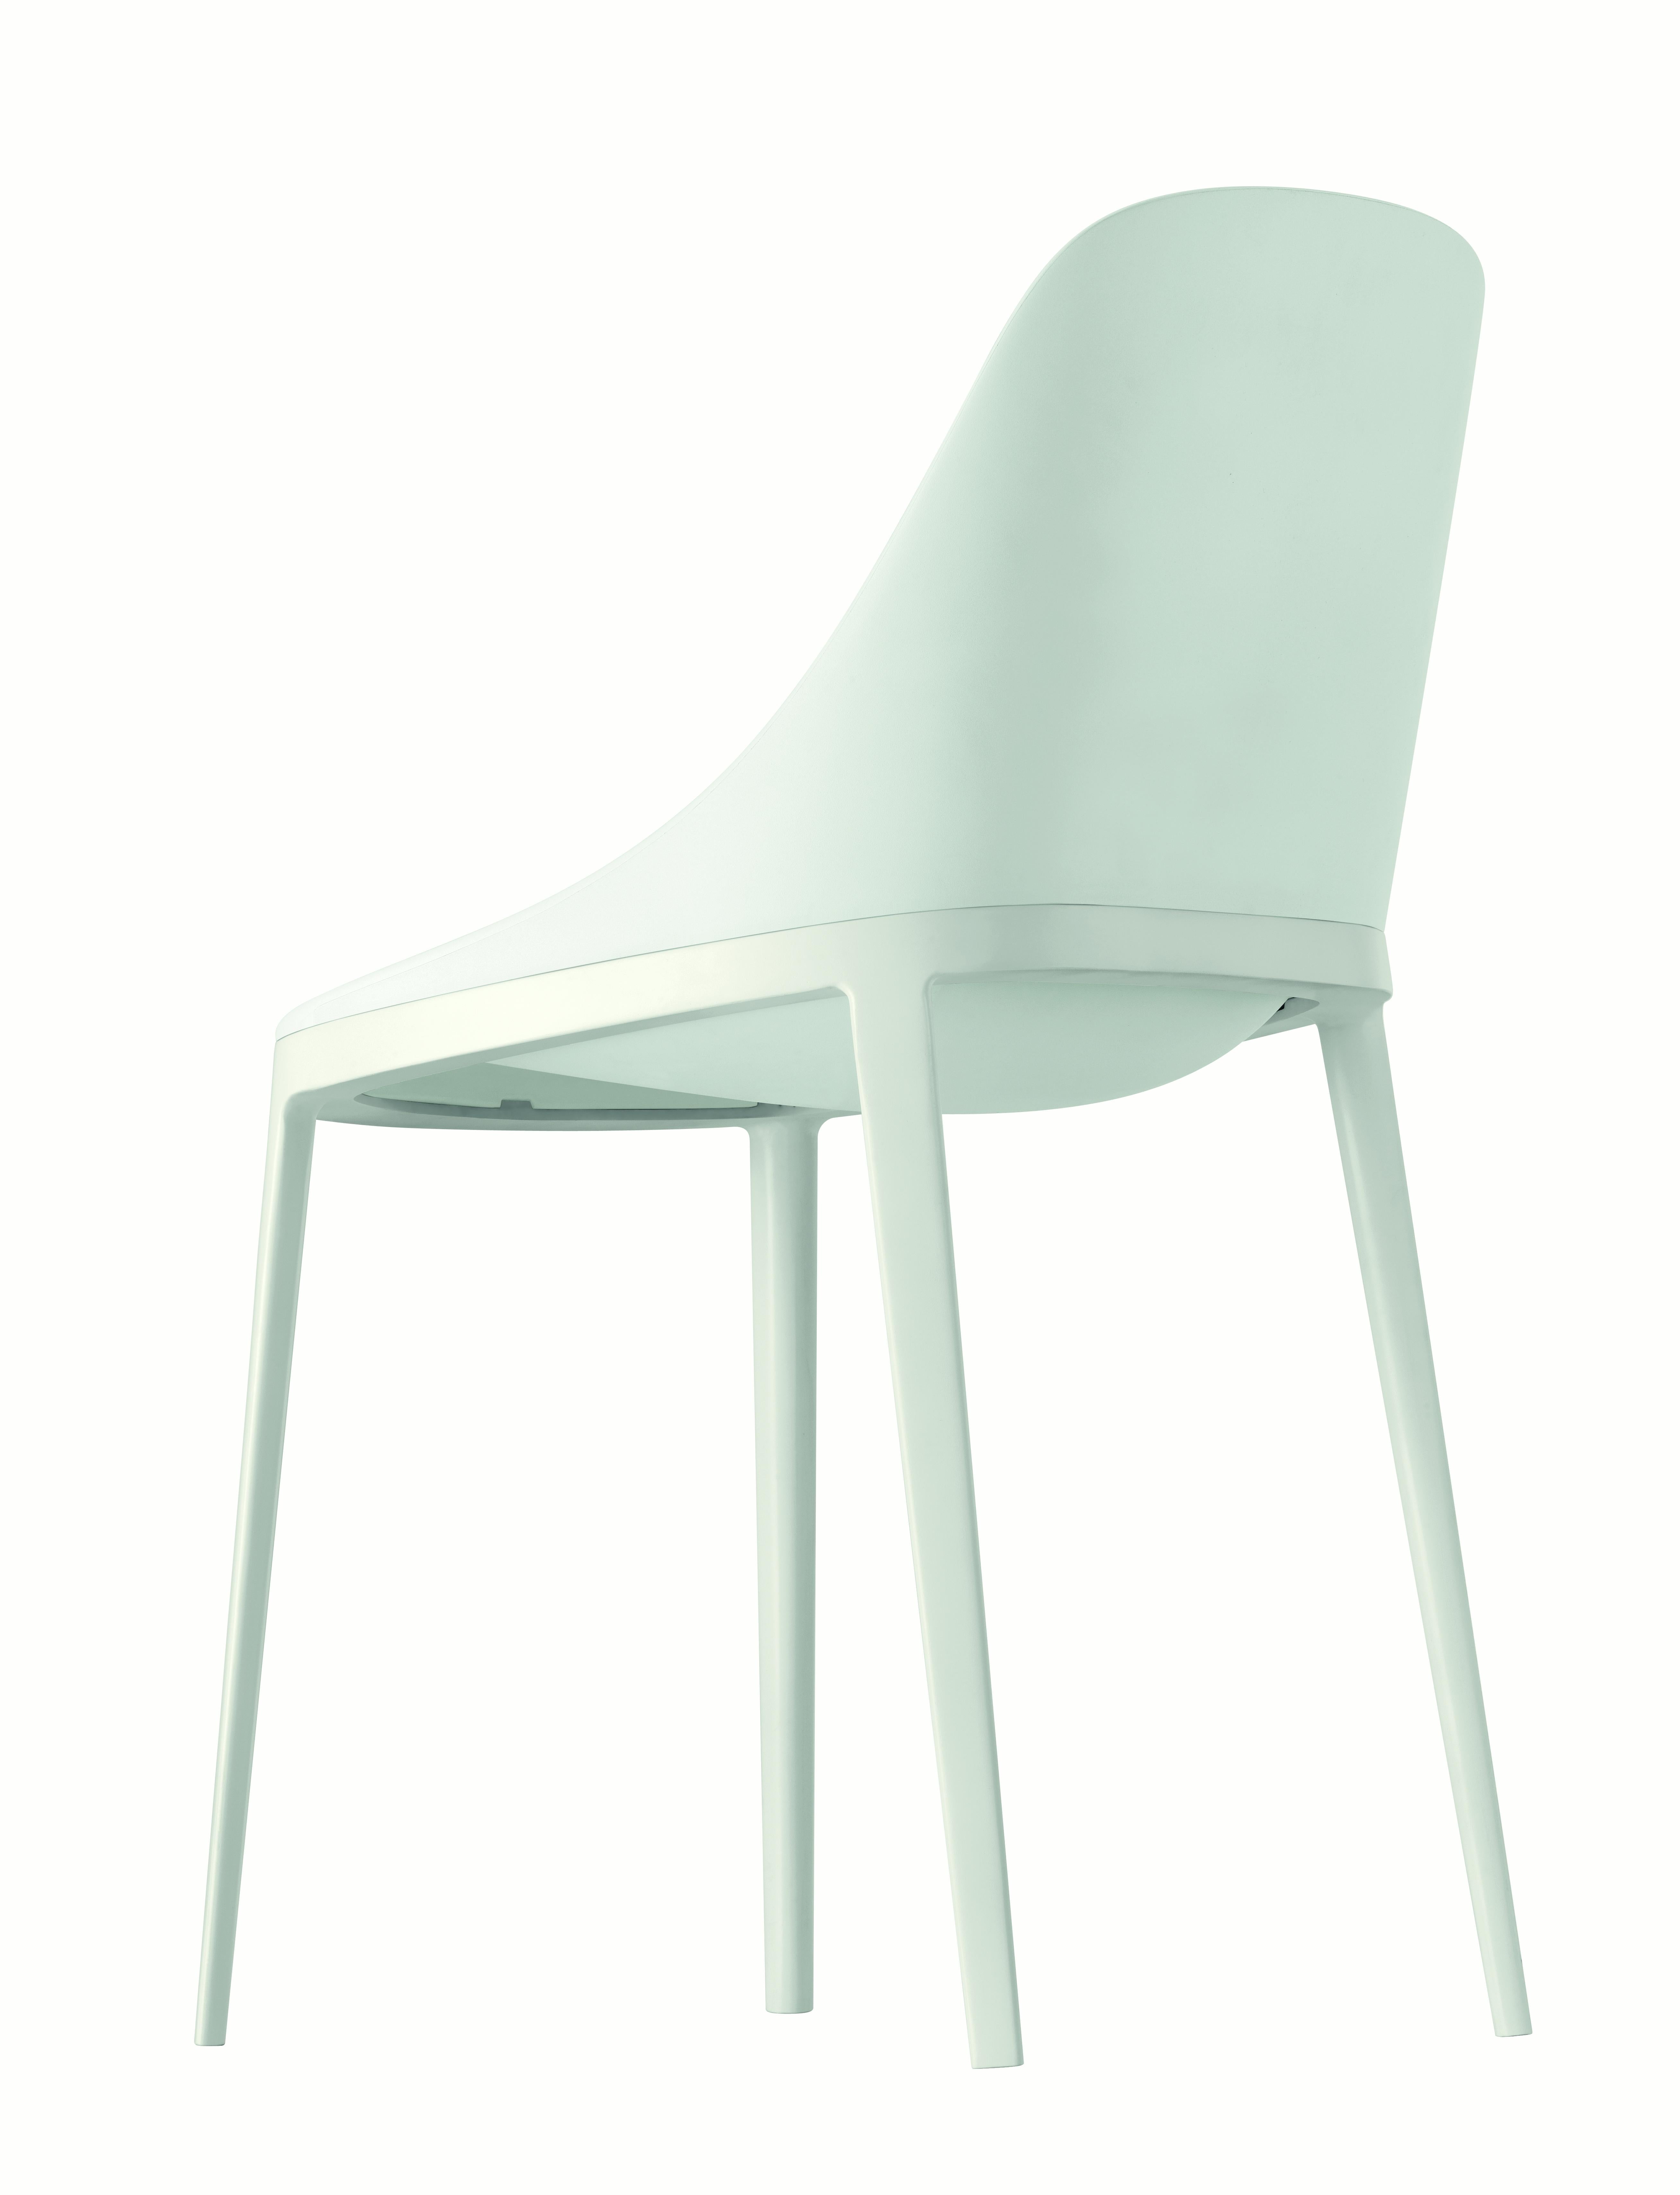 Alias 070 Elle Chair in White with Lacquered Aluminum Frame by Eugeni Quitllet

Chair with lacquered aluminium structure; shell in polyurethane TECH®.

Born in Ibiza in 1972, where he studied design at the institute of art. In 1996, after